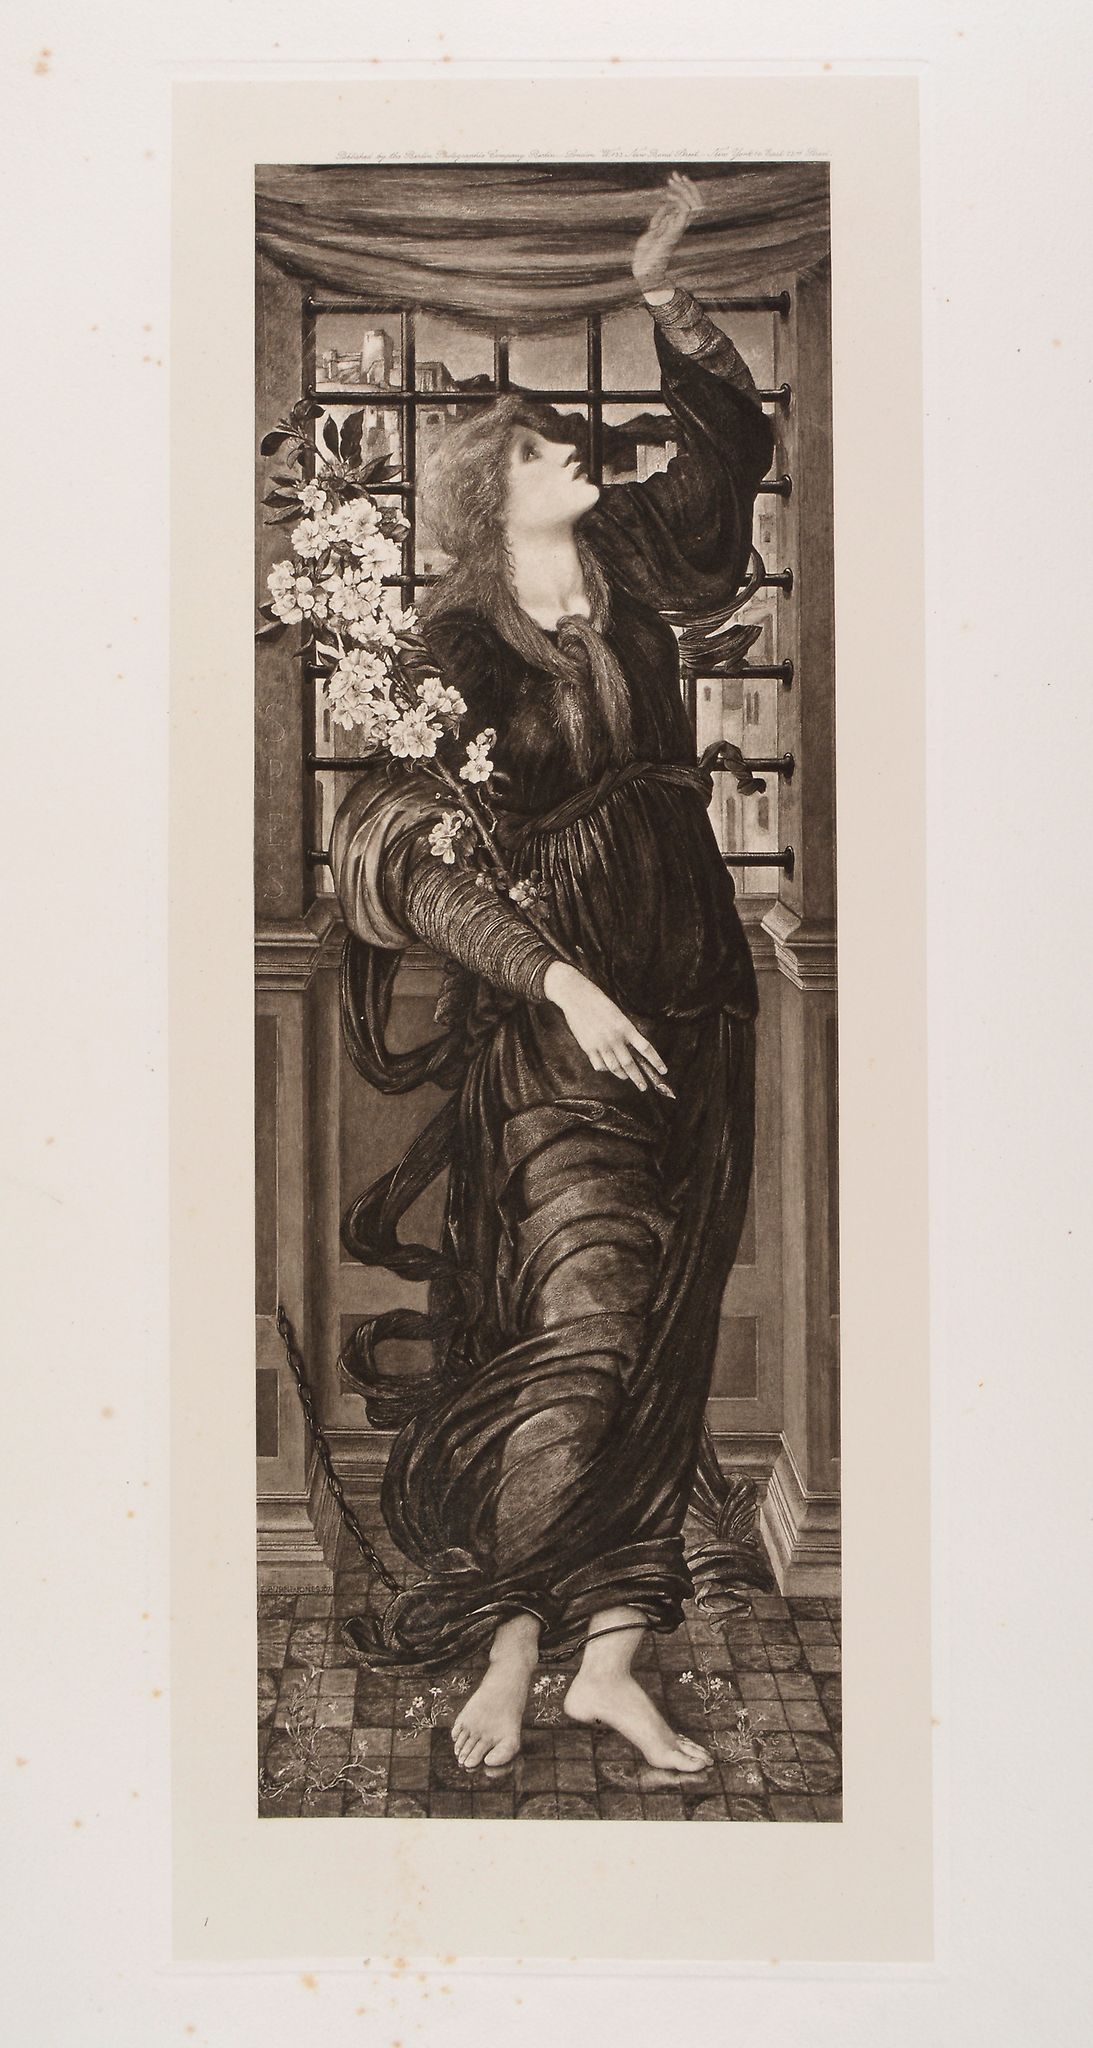 Burne-Jones (Edward) - The Works,  out-of-series copy from an edition limited to 200, portrait and